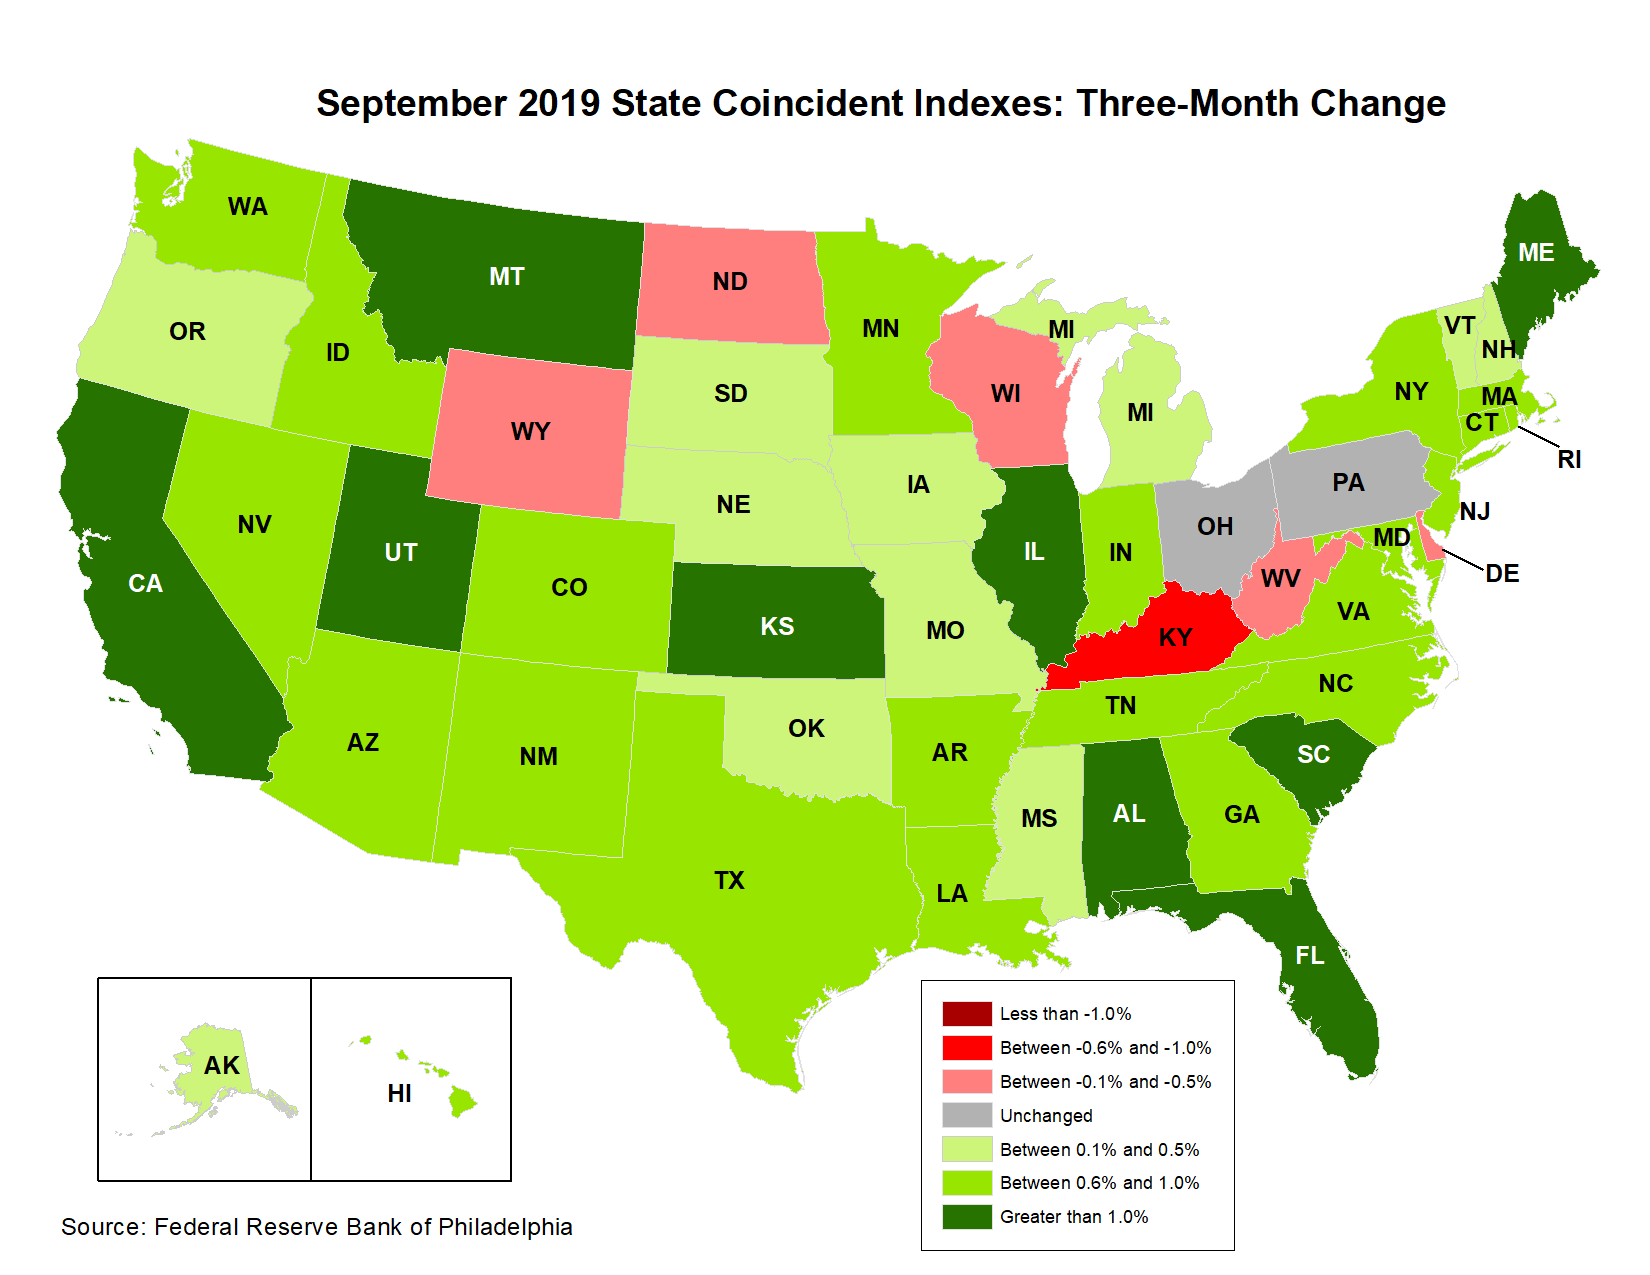 Map of the U.S. showing the State Coincident Indexes Three-Month Change in September 2019